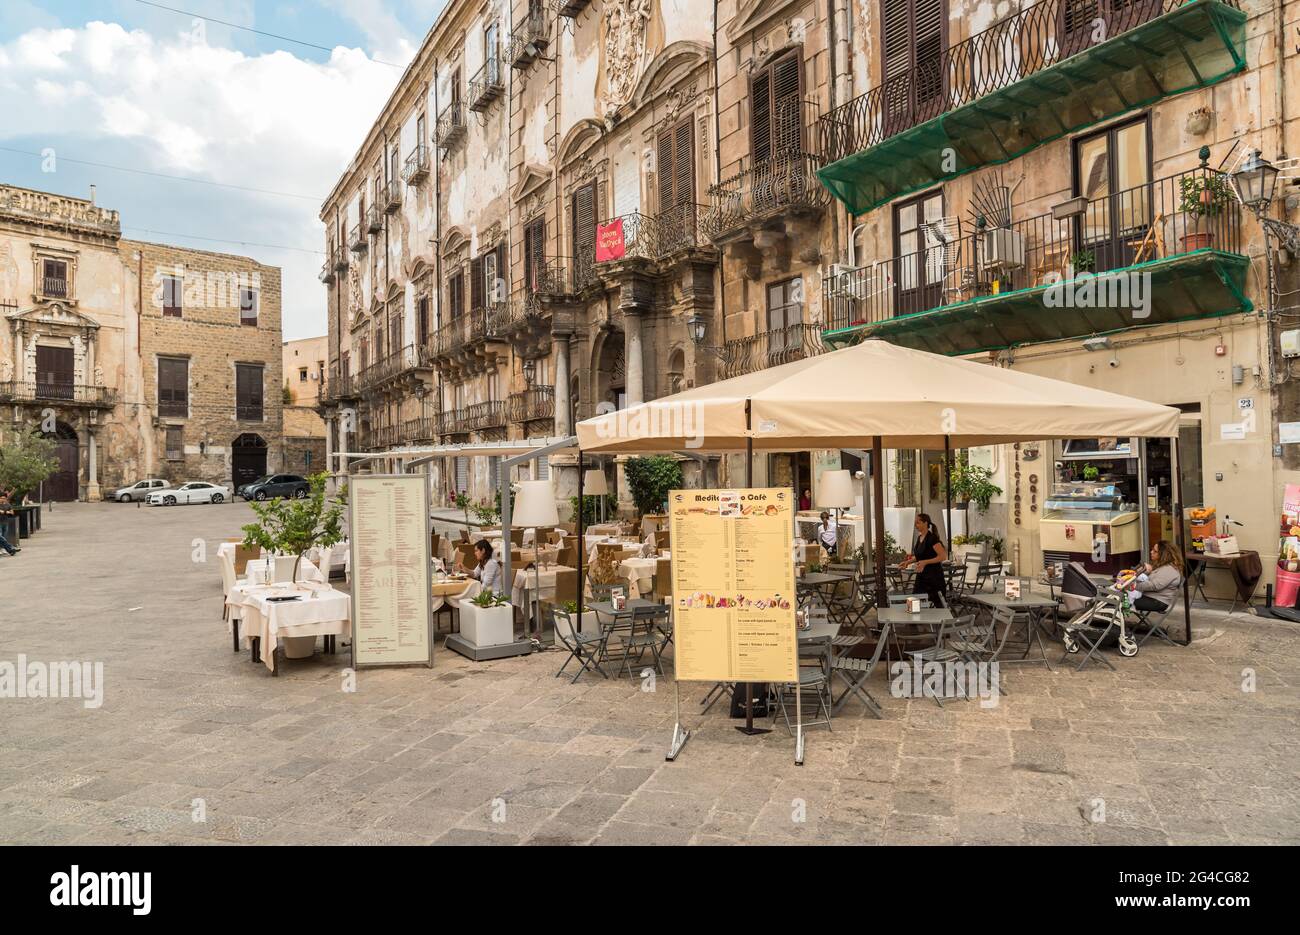 Palermo, Sicily, Italy - October 6, 2017: Bologni square with Alliata Villafranca palace and outdoor bar in the historic center of Palermo, Sicily, It Stock Photo